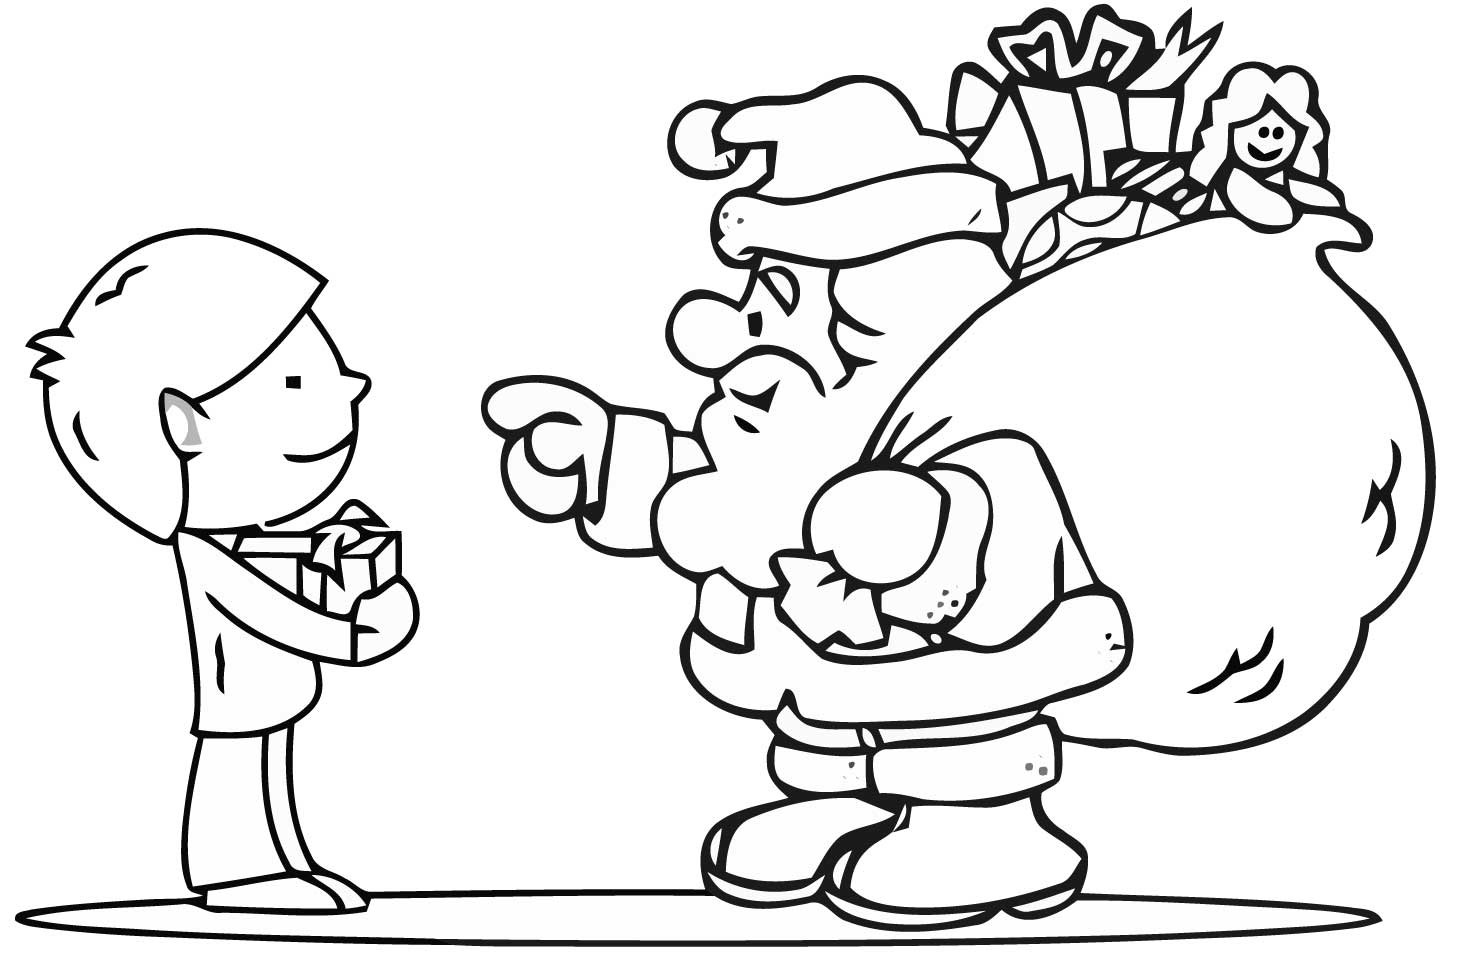 Children Christmas Coloring Pages
 Free Christmas Colouring Pages For Children